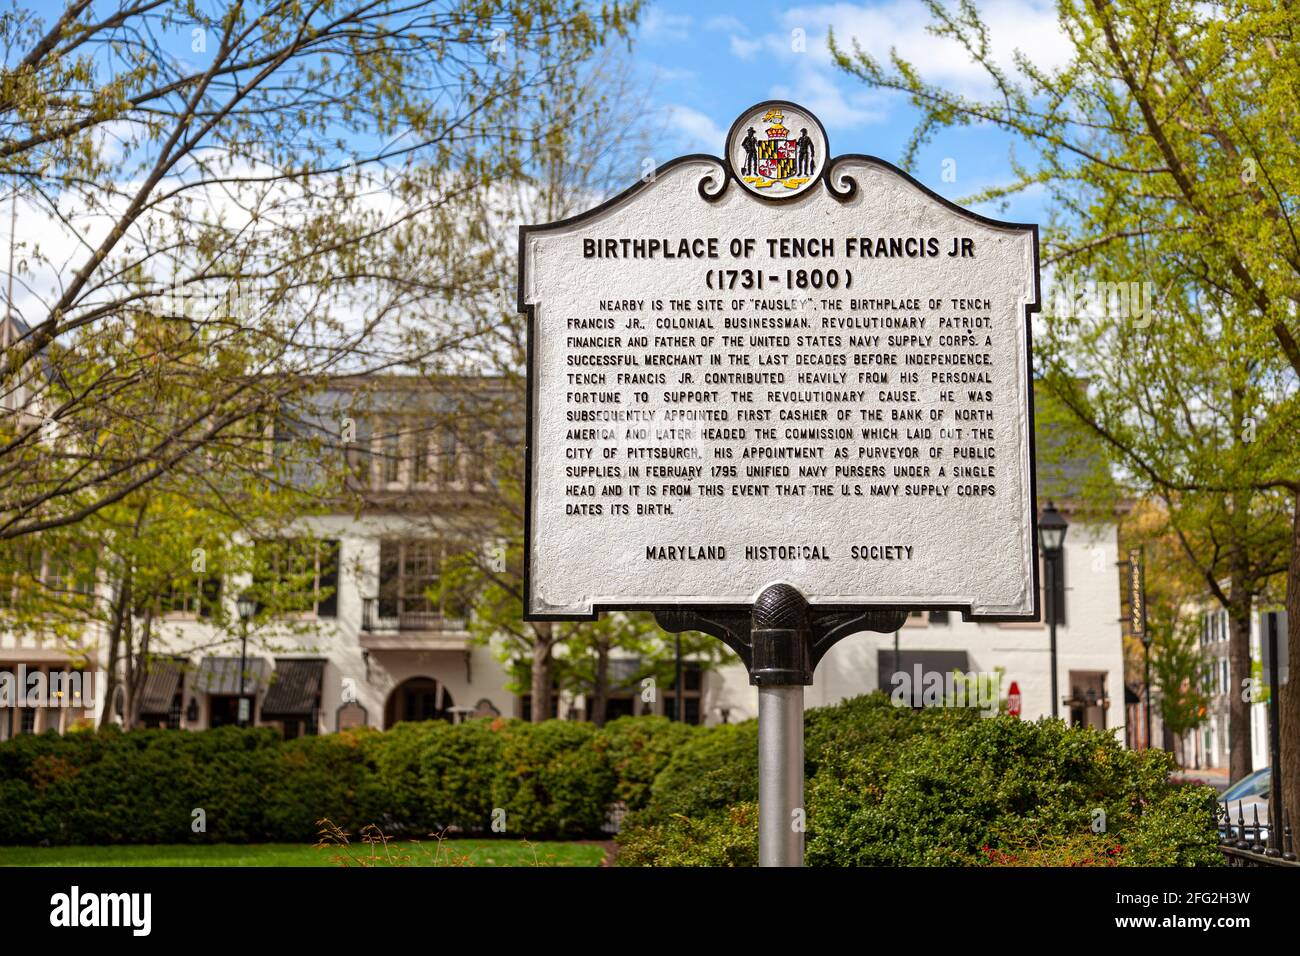 Easton, MD, USA 04-16-2021: A signpost erected by Maryland Historical Society on the location of the birthplace of revolutionary business man and merc Stock Photo